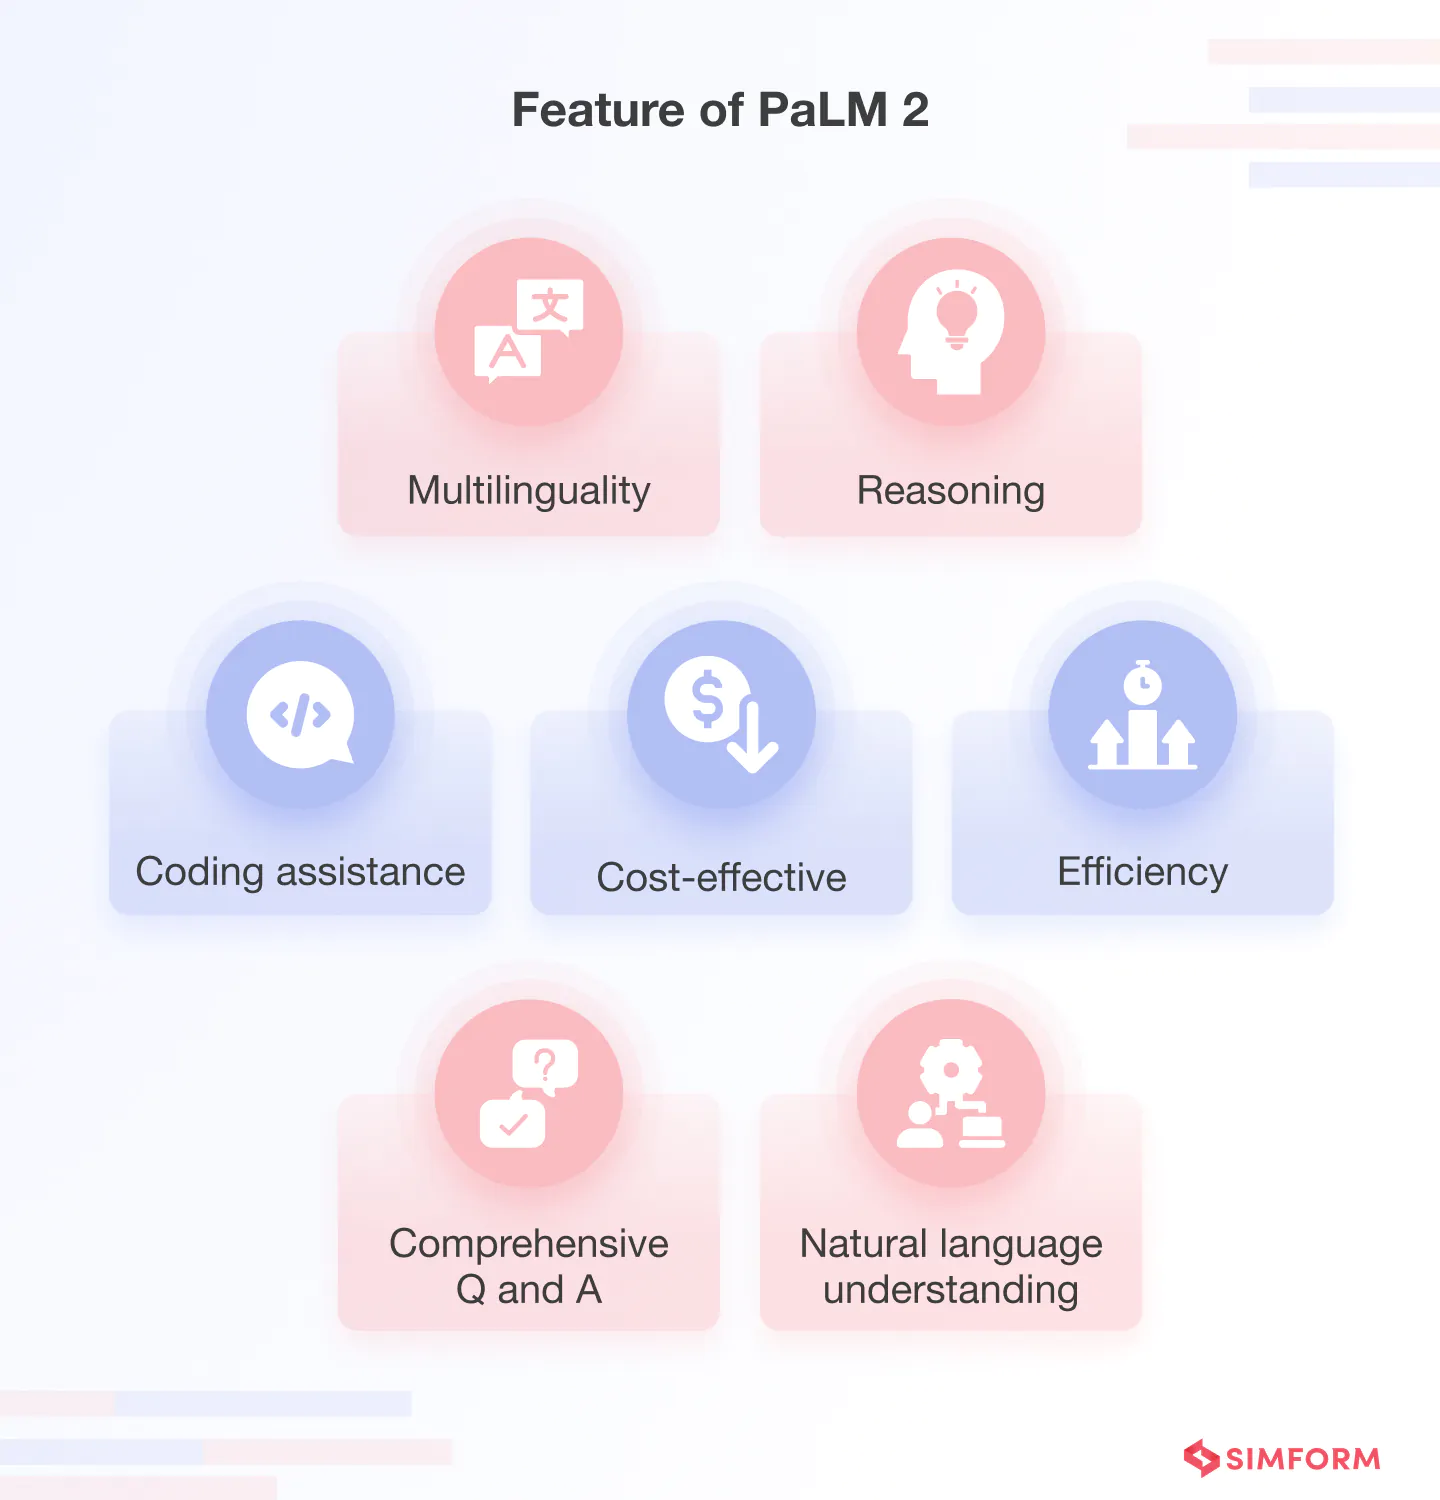 Features of PaLM 2